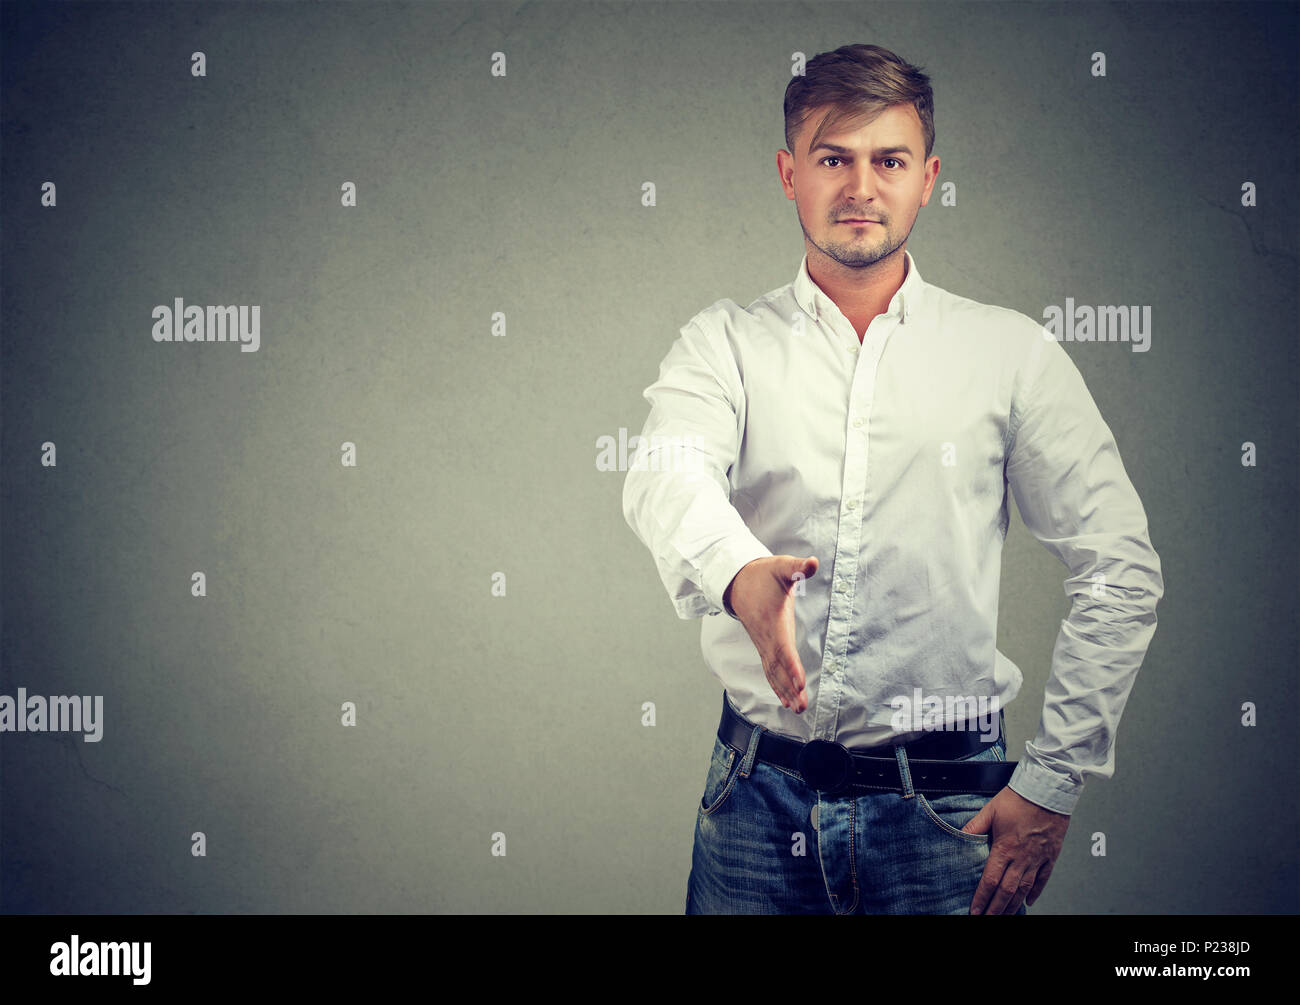 Confident young man outstretching hand for handshake when greeting partner on gray background. Stock Photo